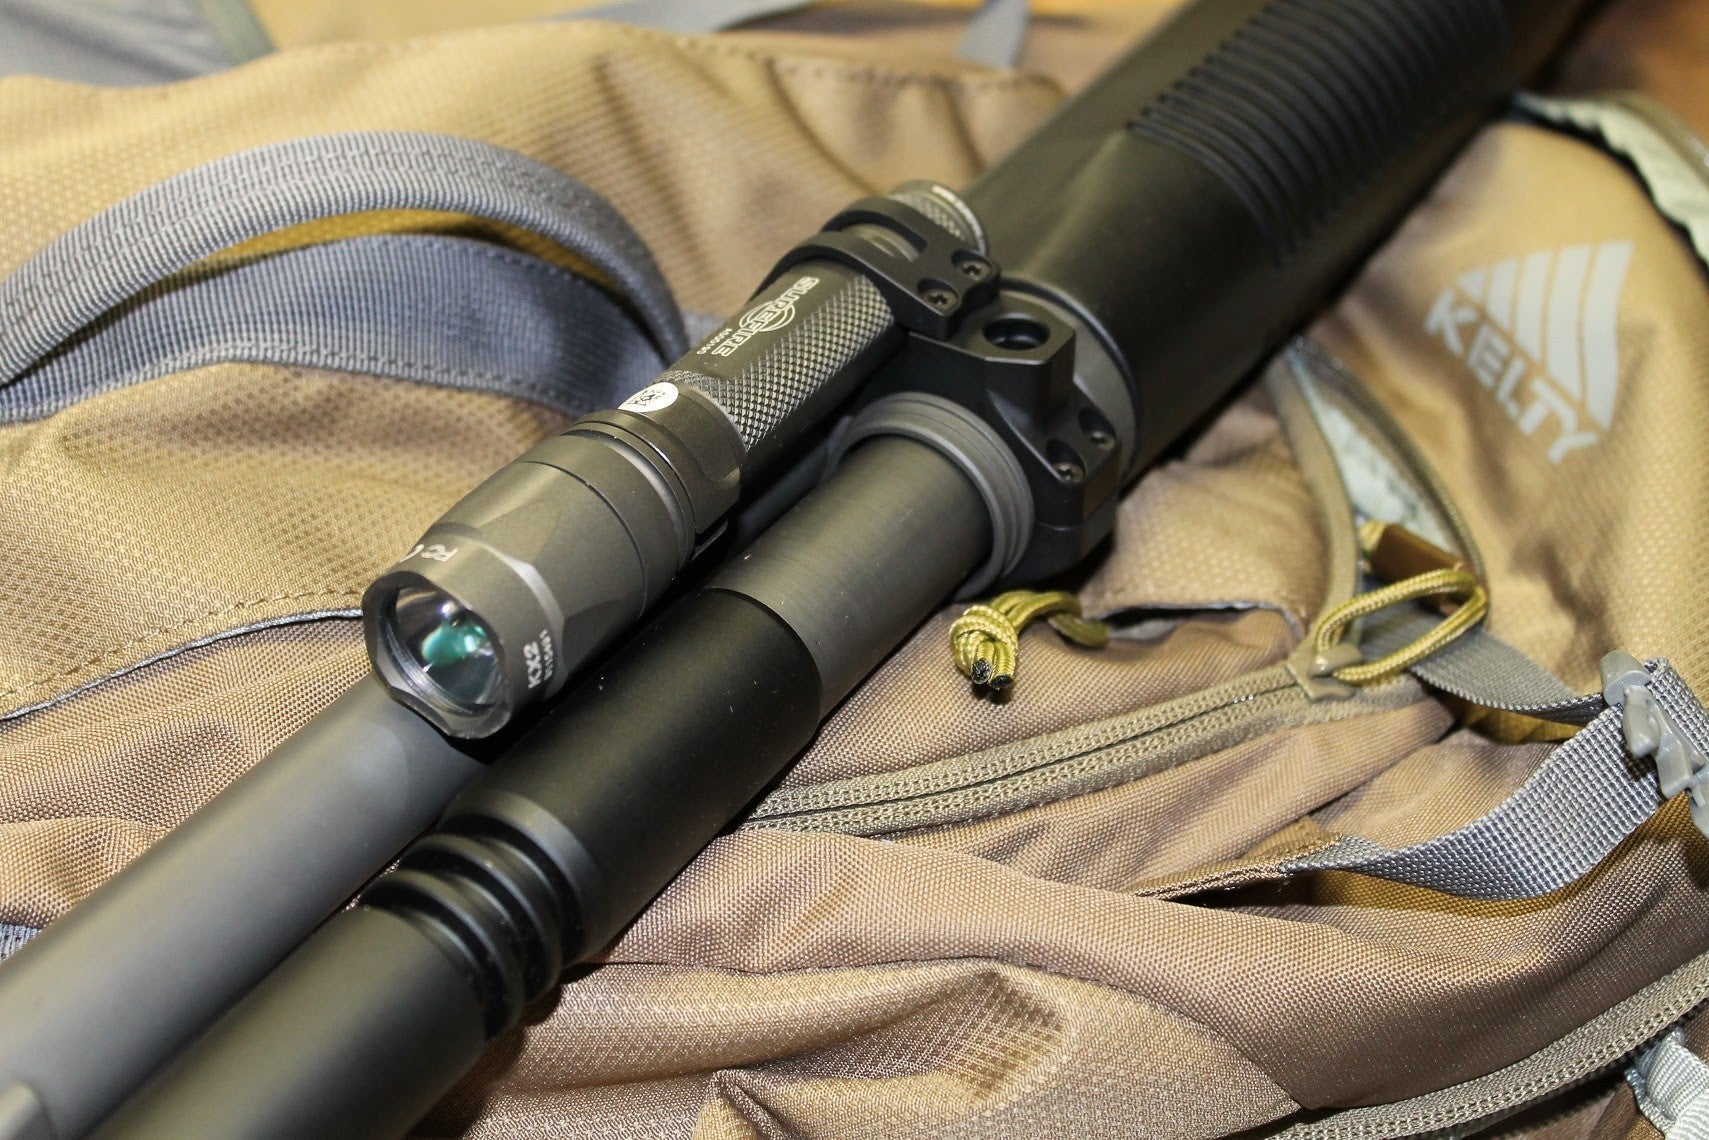 The folks at AVA Tactical have developed a slick looking light and...